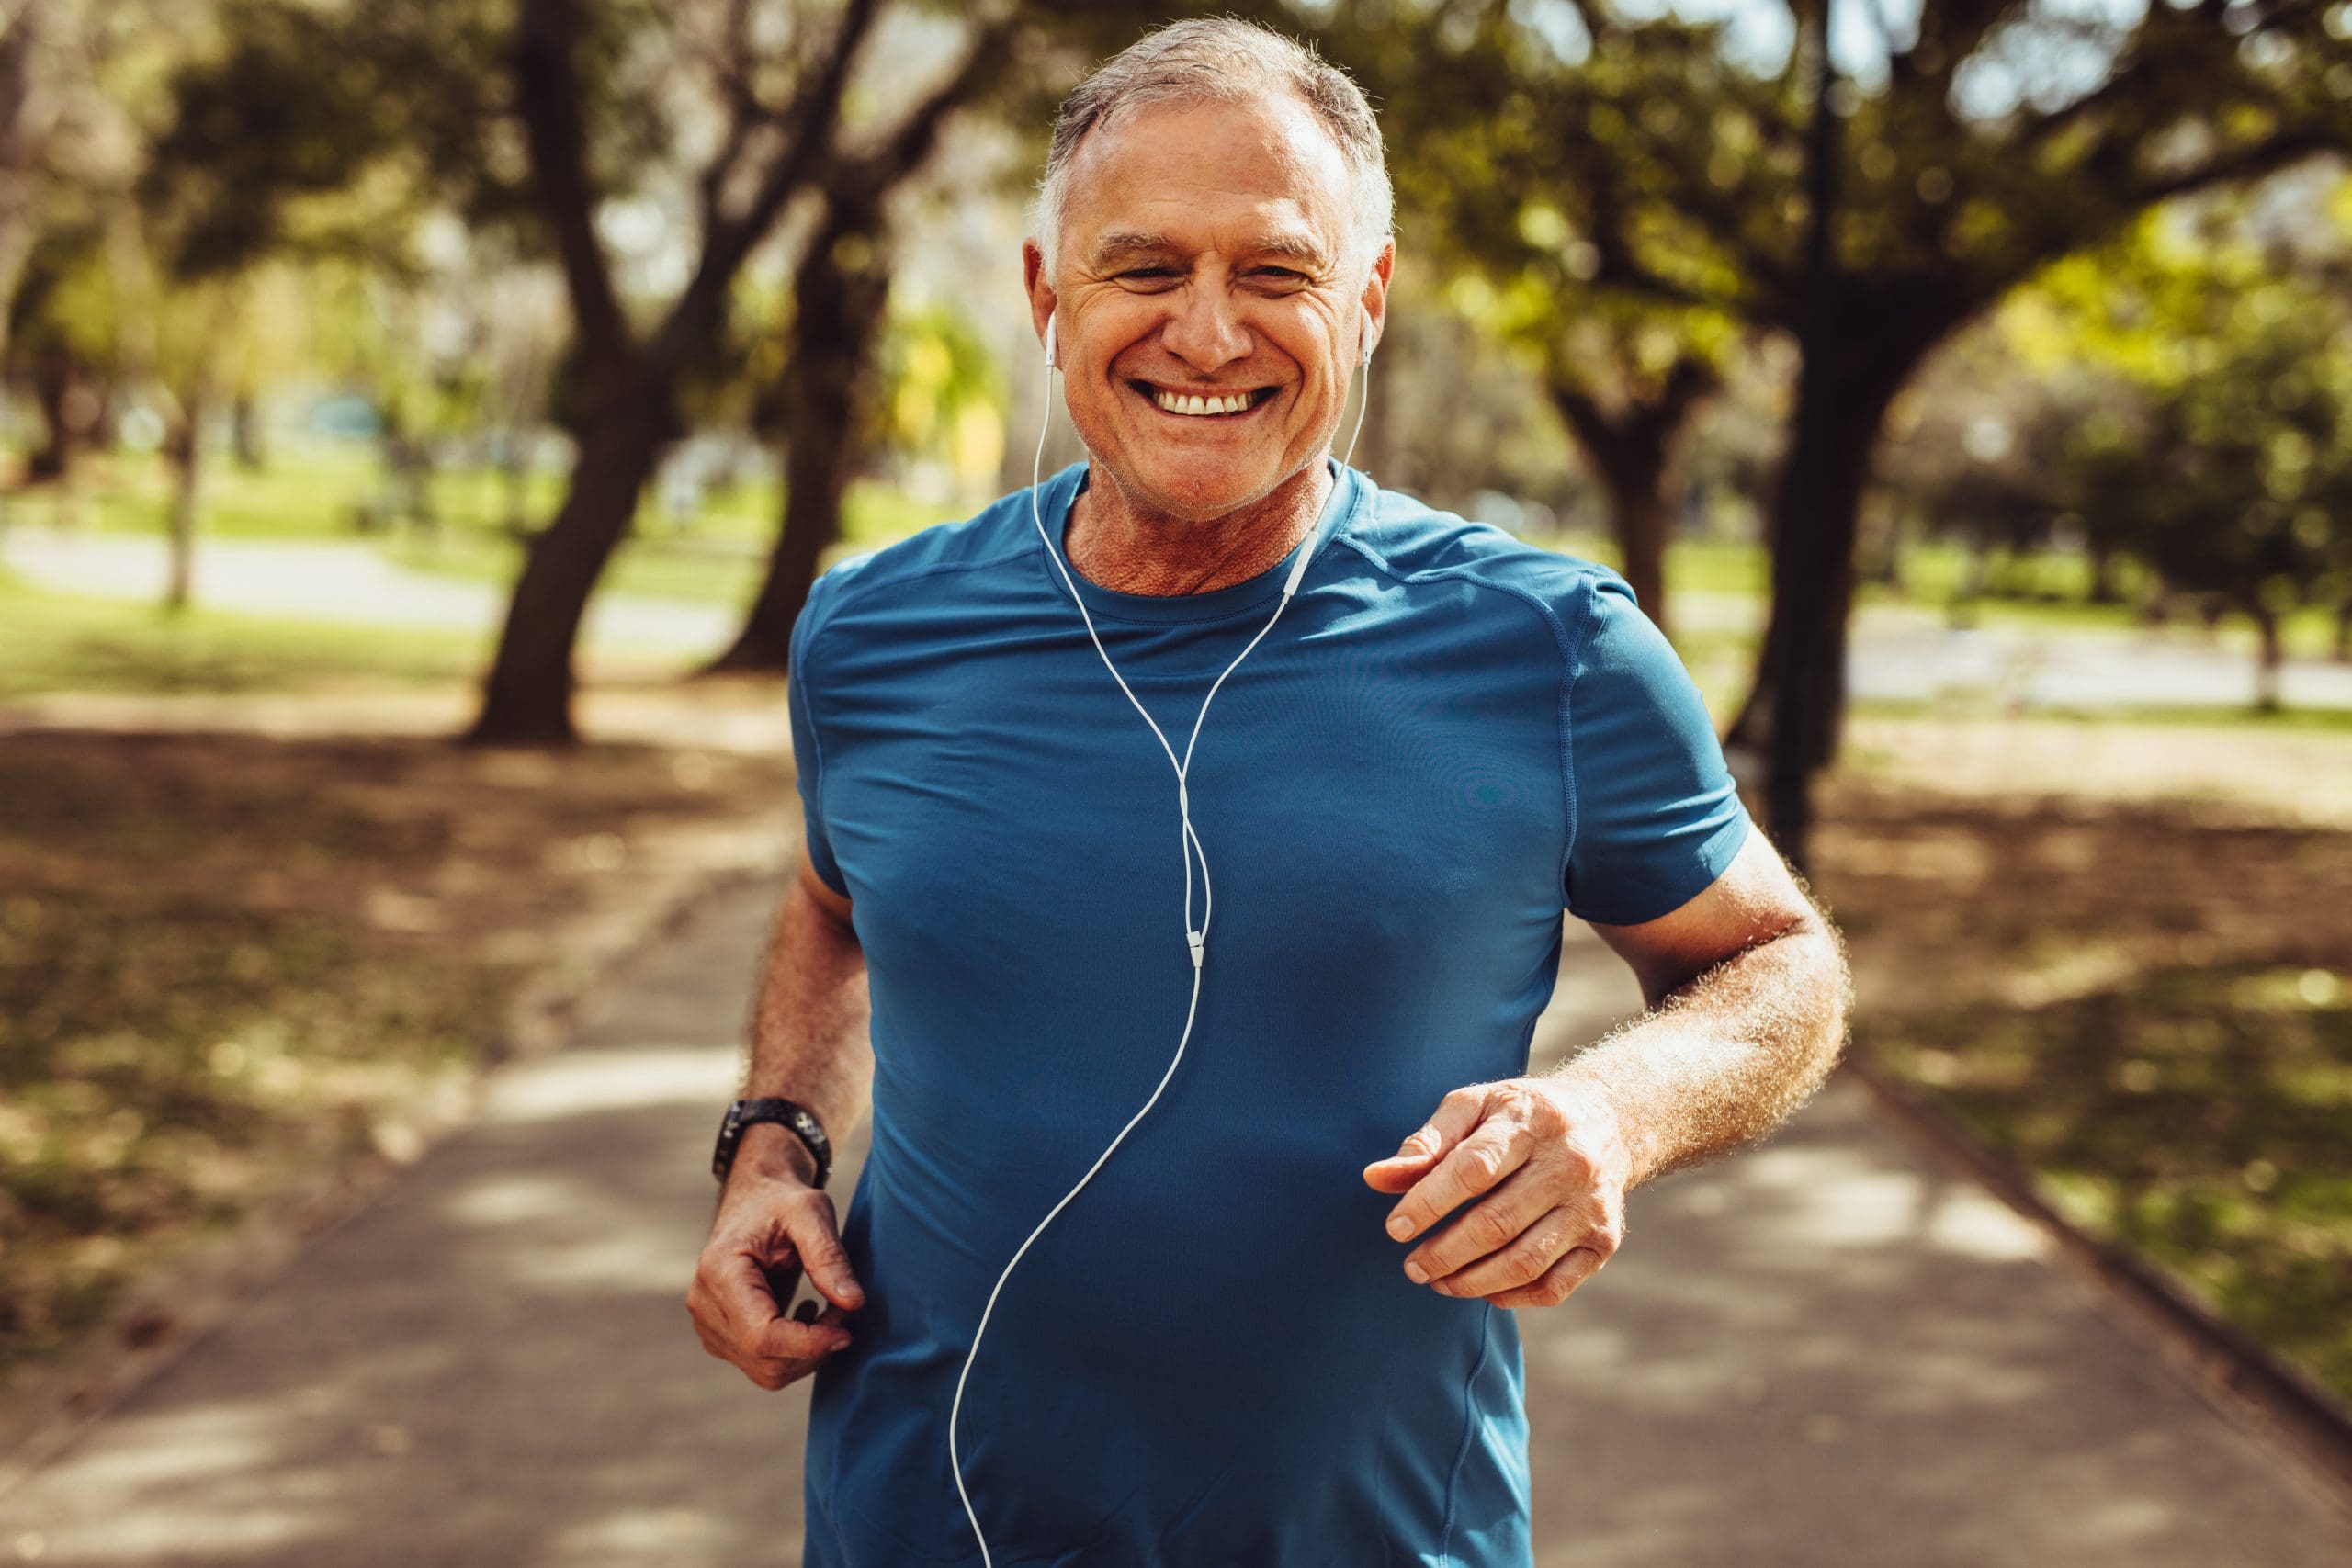 Close up of a smiling man running while listening to music using earphones.